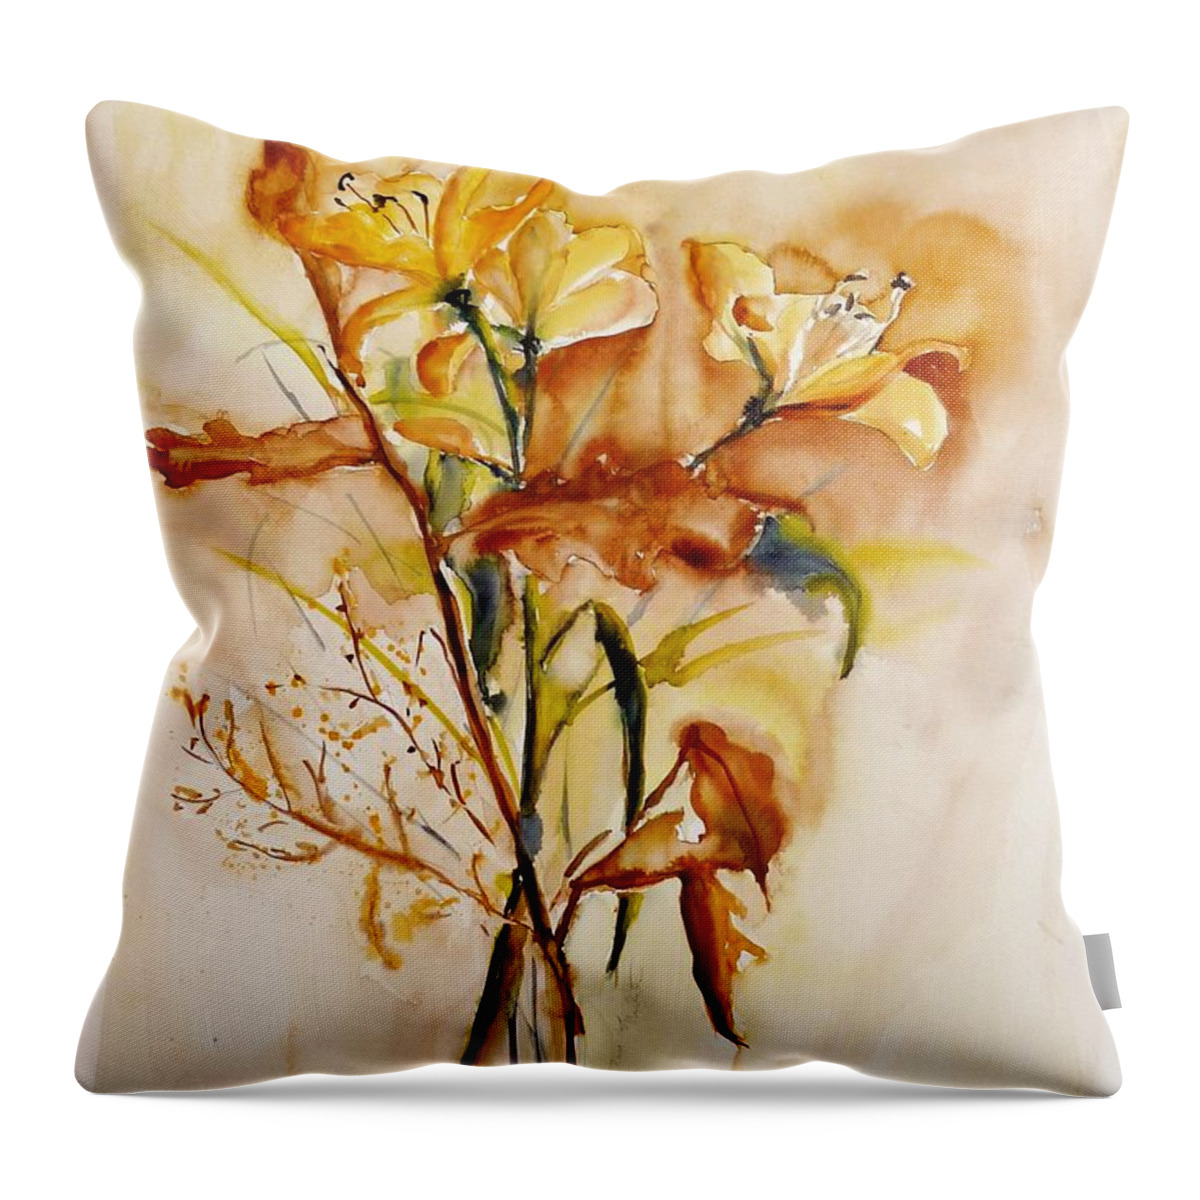 Painting Throw Pillow featuring the painting Yellow Lilies by Karina Plachetka